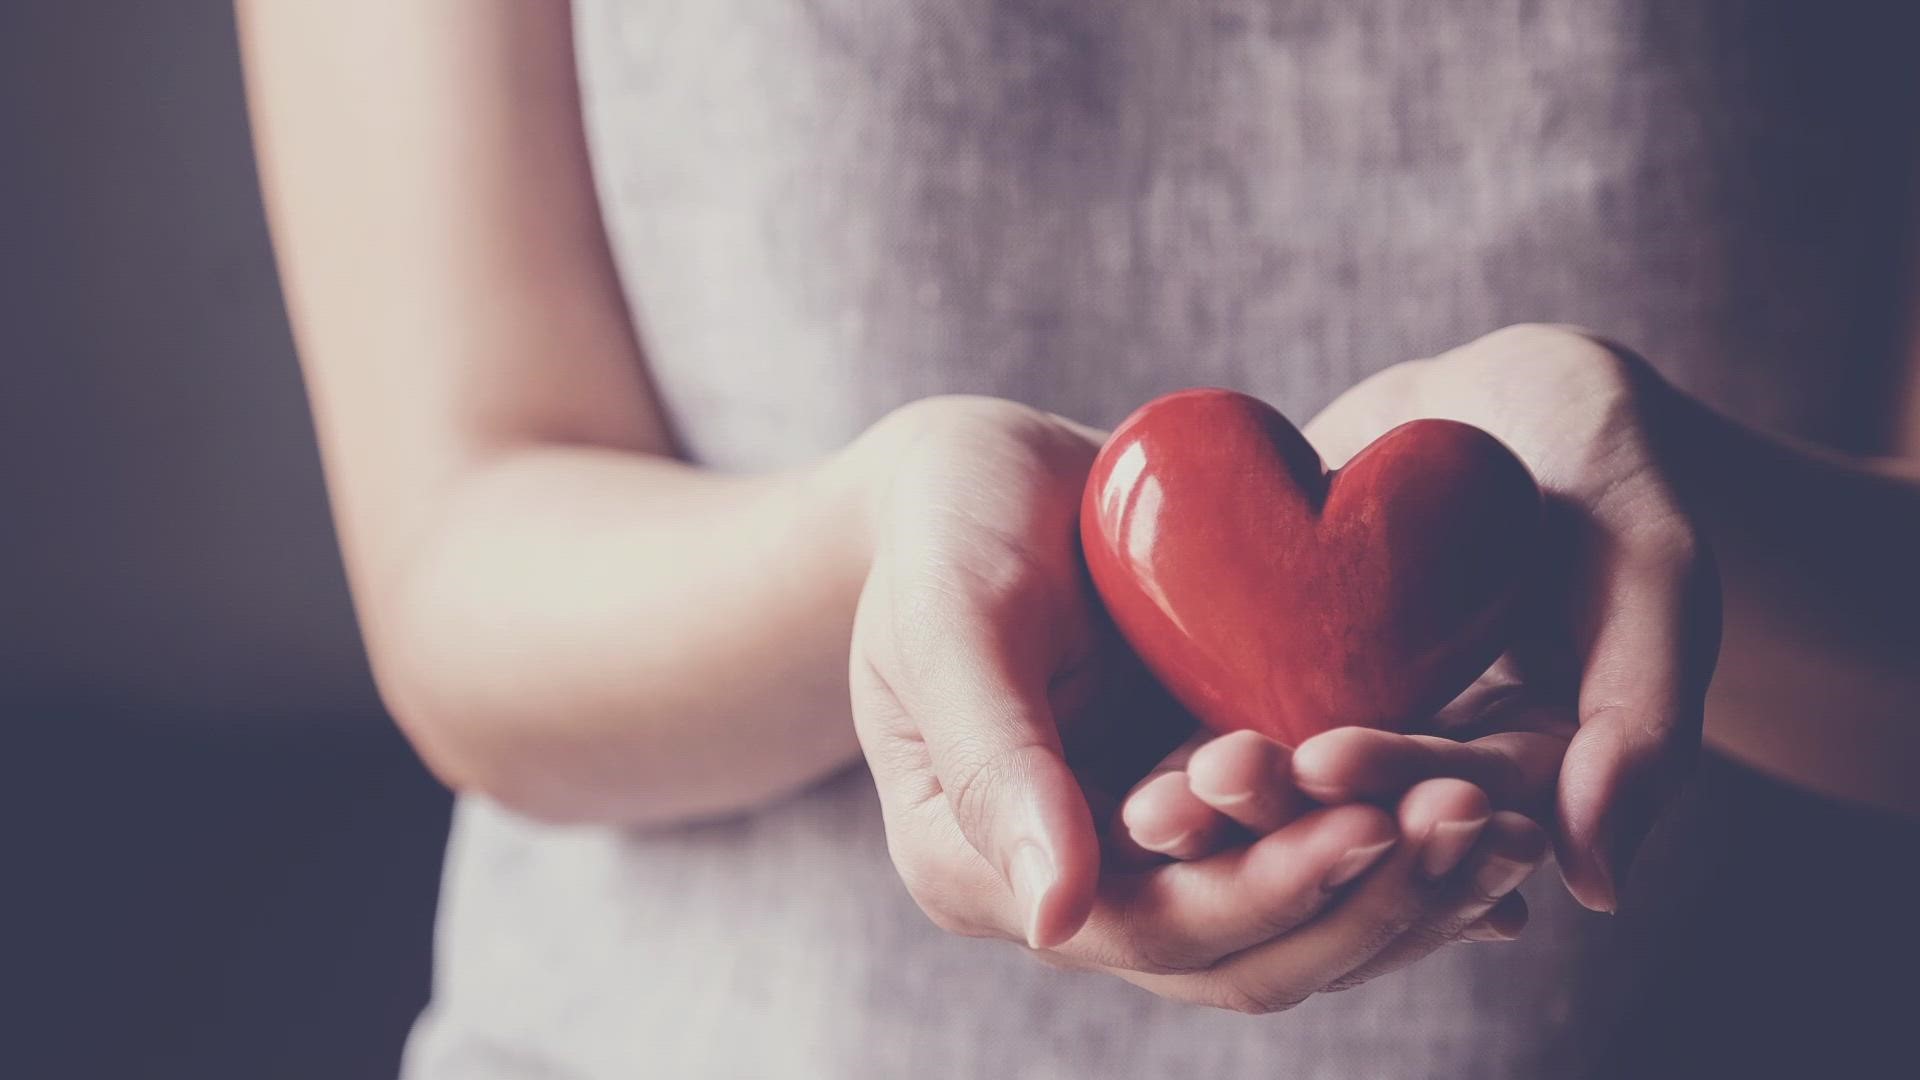 Valentine's Day is also celebrated as Congenital Heart Defect Awareness Day, calling attention to something that impacts 1 in 100 babies born in the U.S.